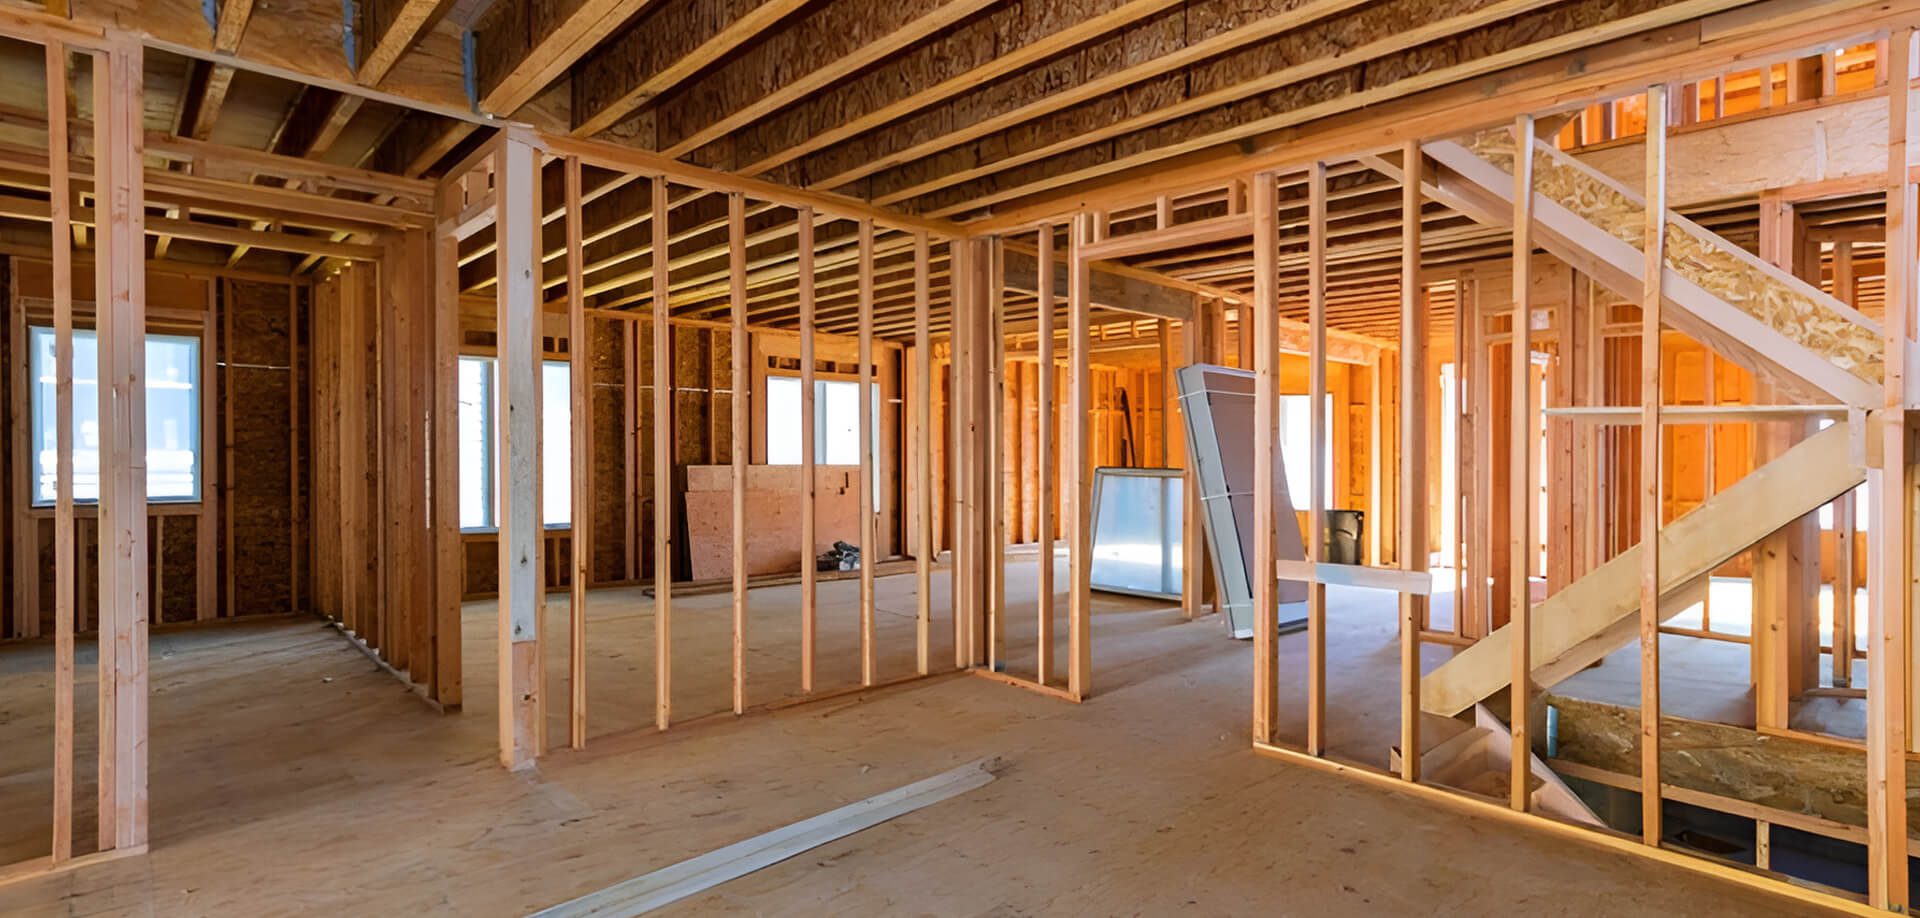 A room with wood framing and wooden floors.